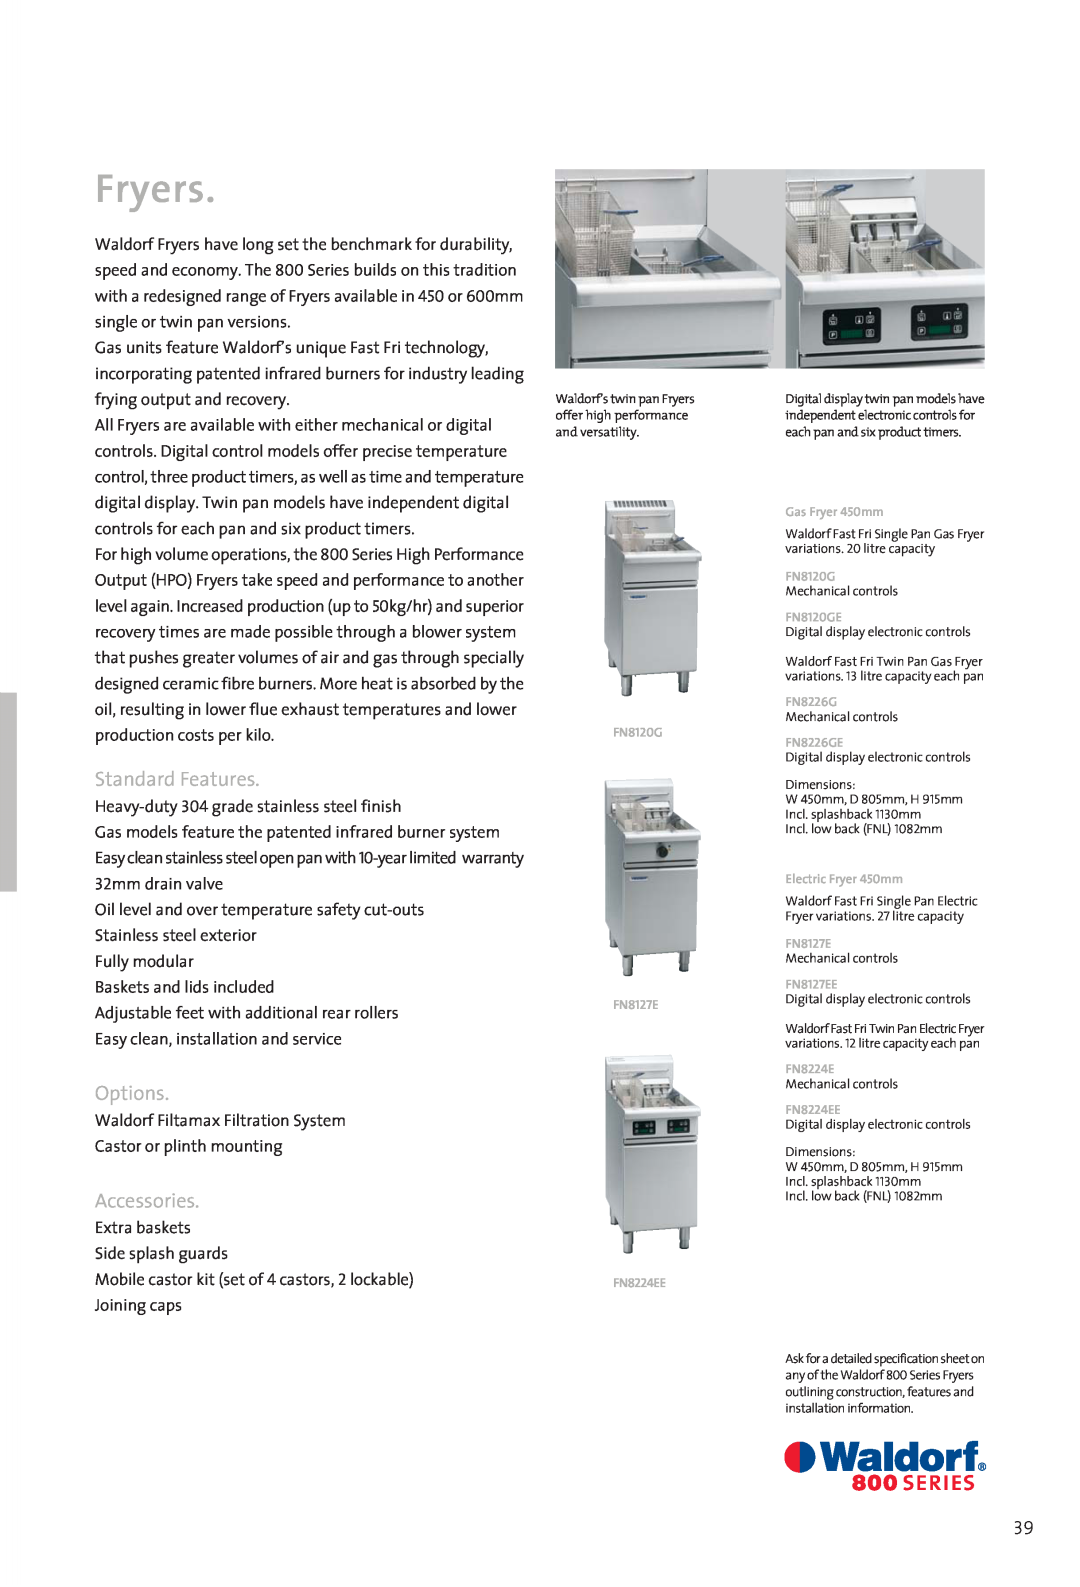 Moffat 800 manual Fryers, Standard Features, Options, Accessories 